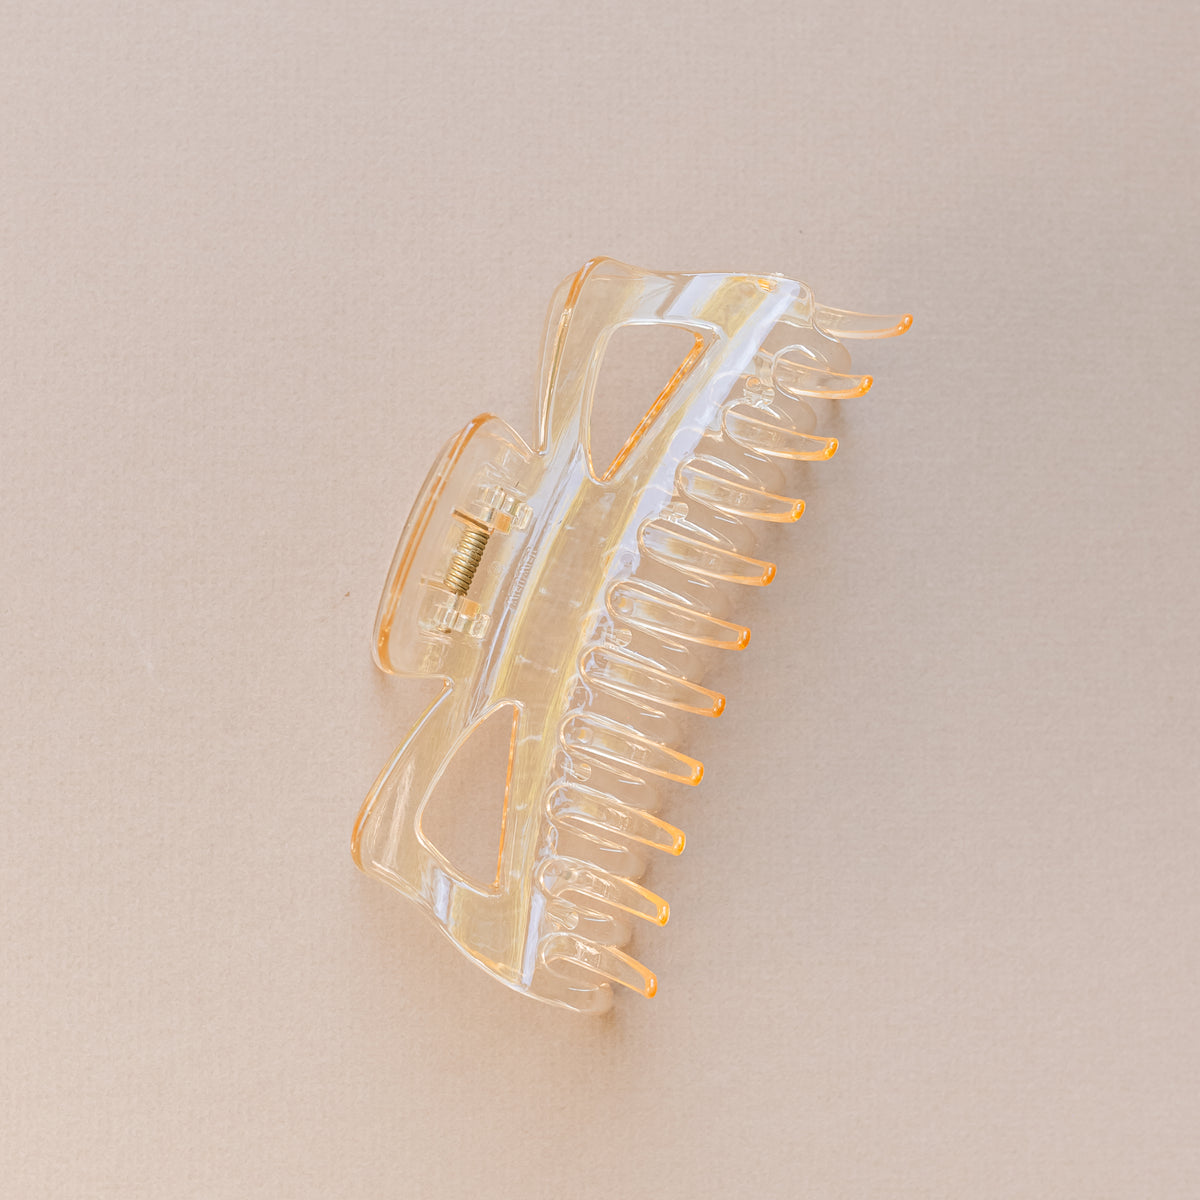 Translucent Mega Claw Clip | Fall 23 Collection